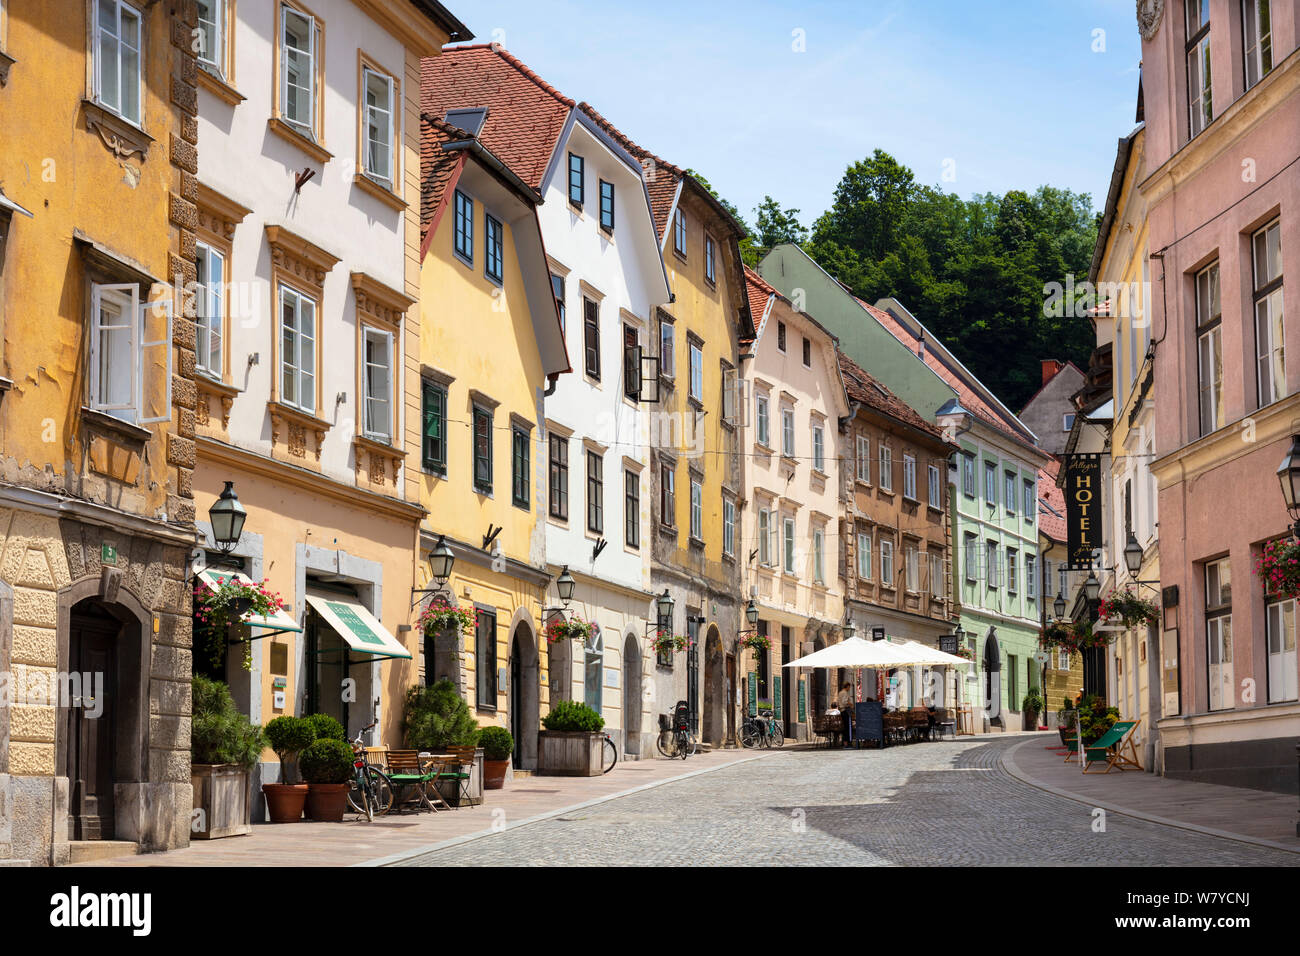 Gornji trg or Gornji street  or Gornji square in the Old town district leads to the walkway to the castle Old town Ljubljana Slovenia Eu Europe Stock Photo